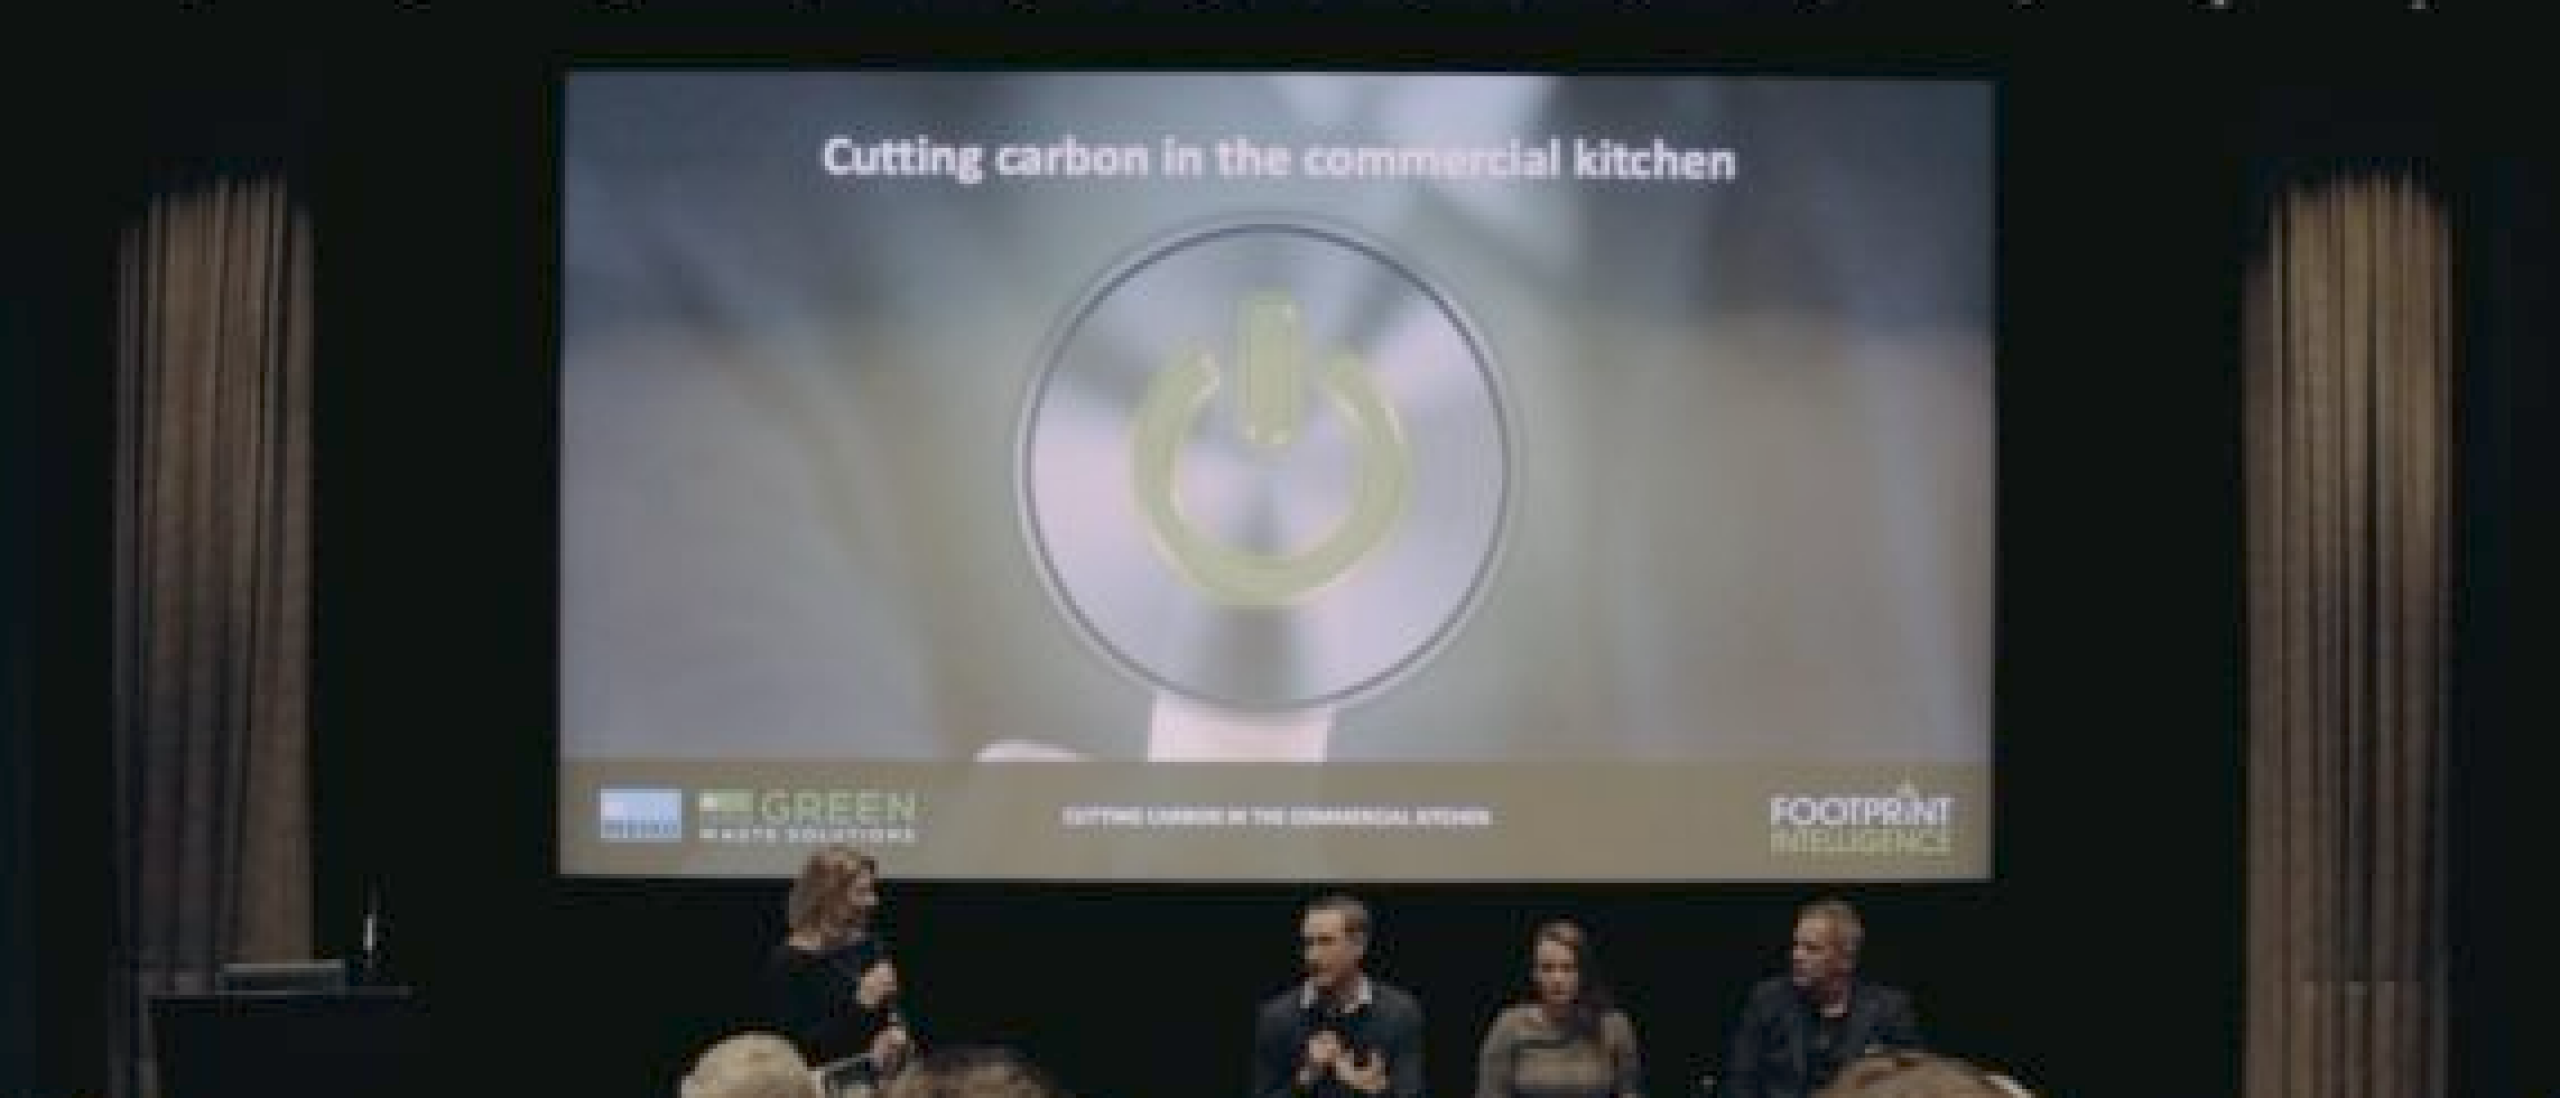 REPORT OUTLINES HOW TO CUT CARBON IN COMMERCIAL KITCHENS